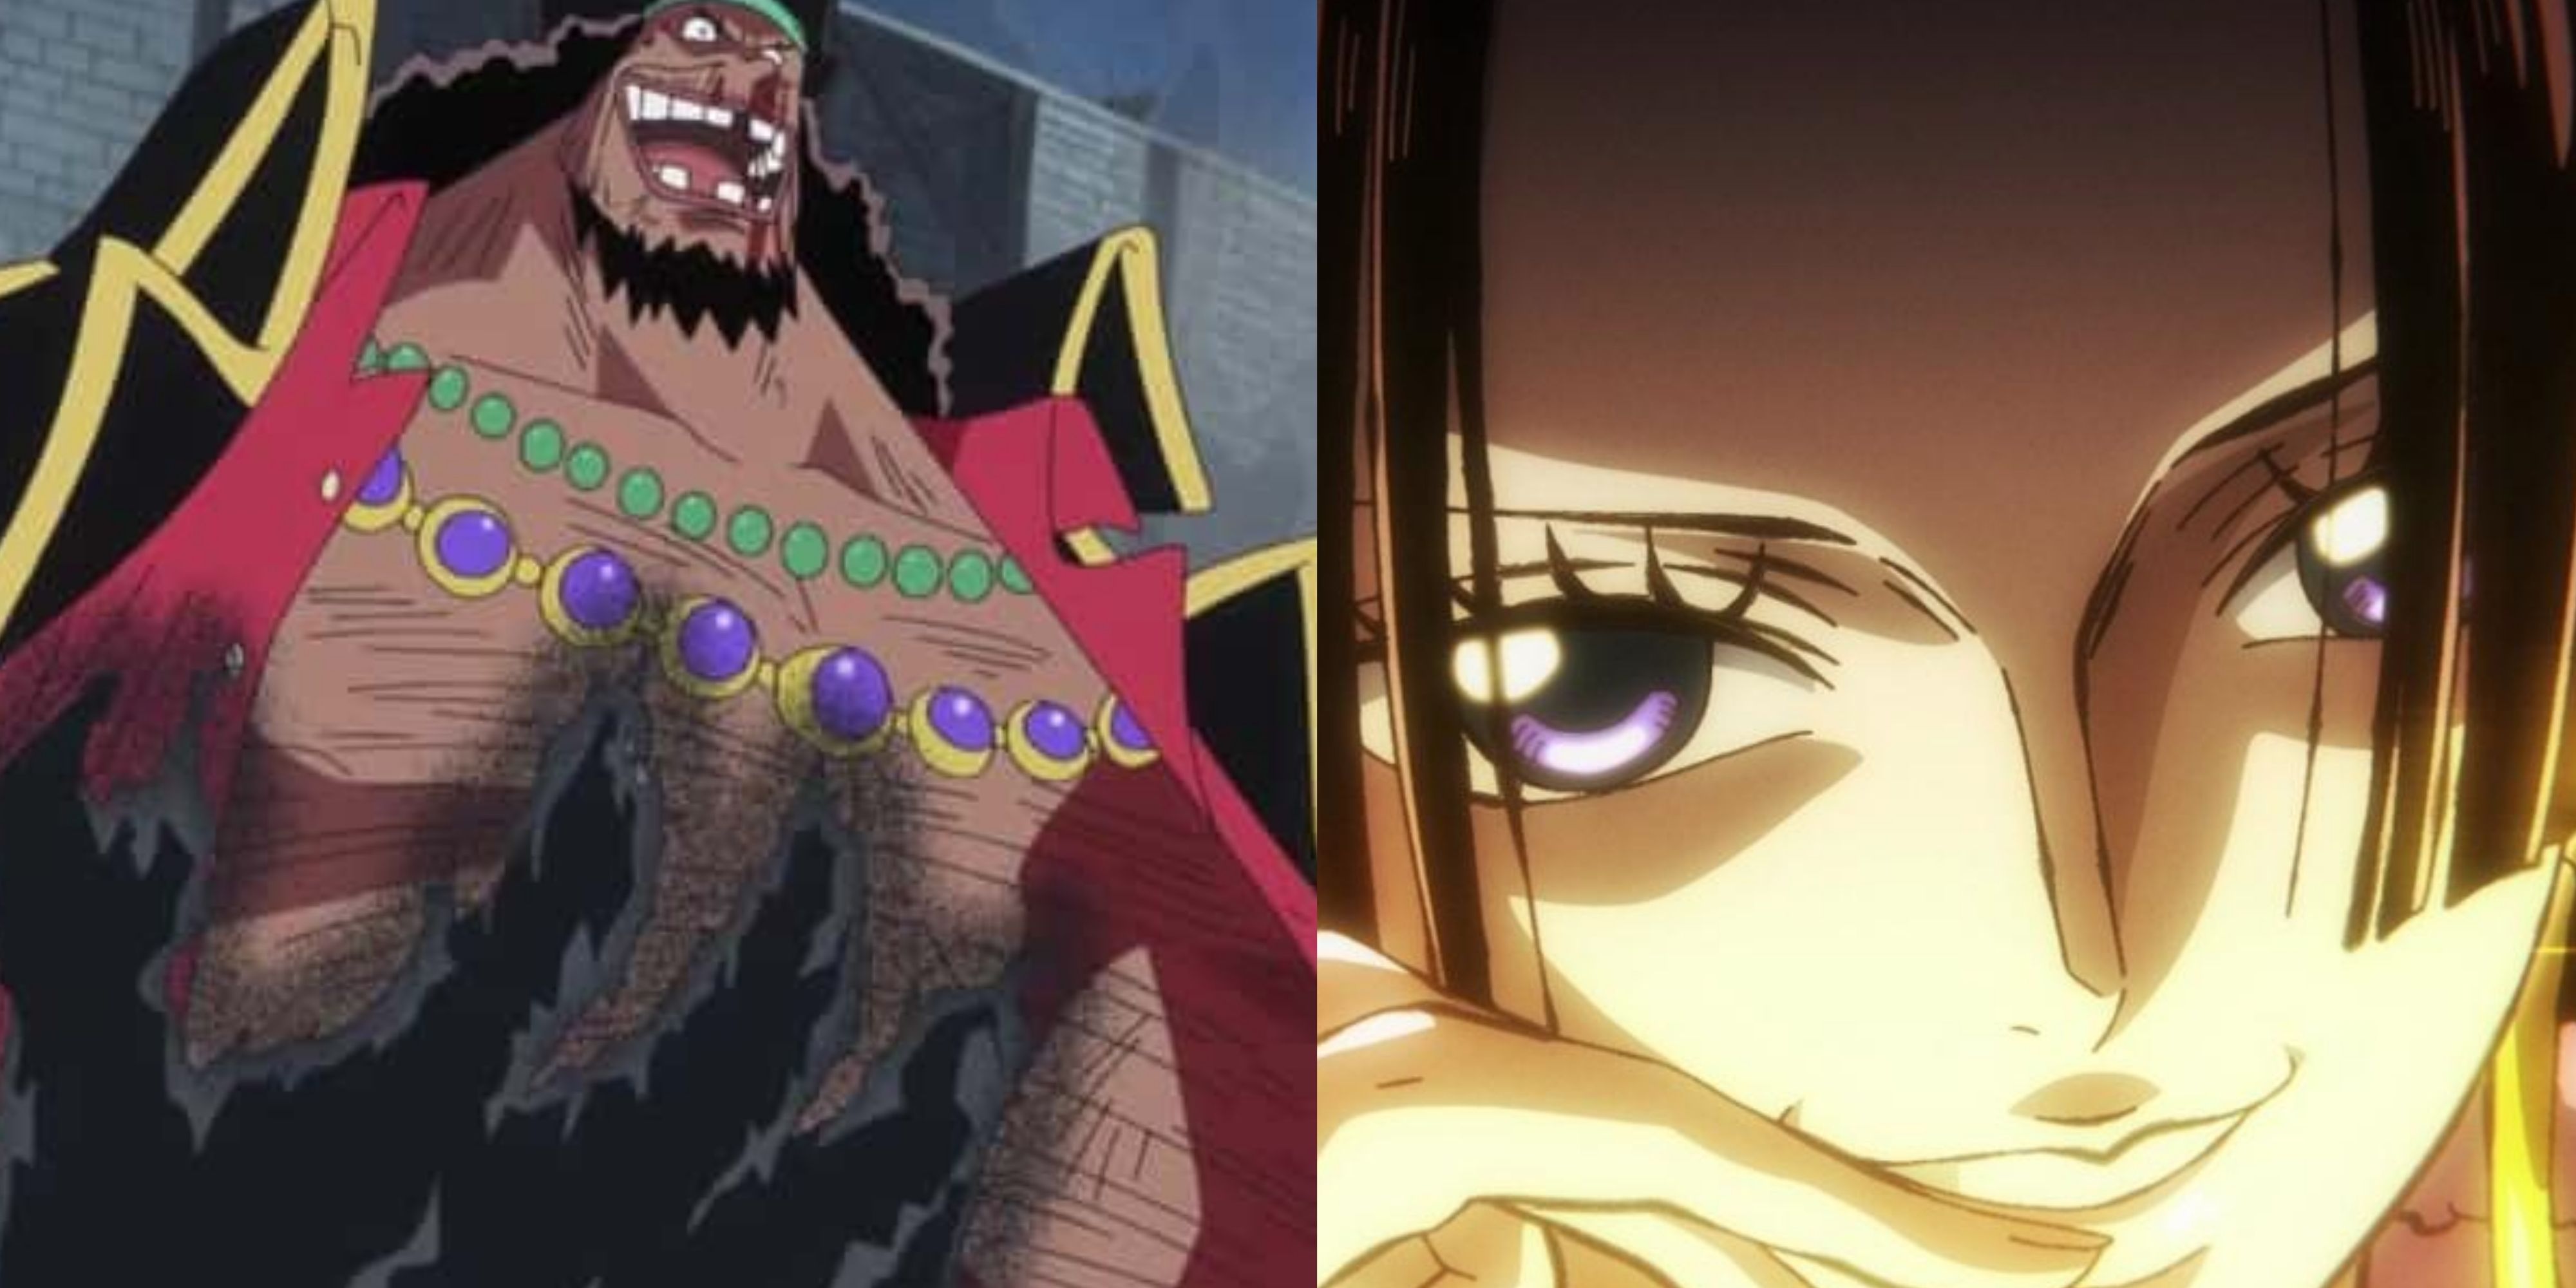 When Did Haki First Appear In The One Piece Series?